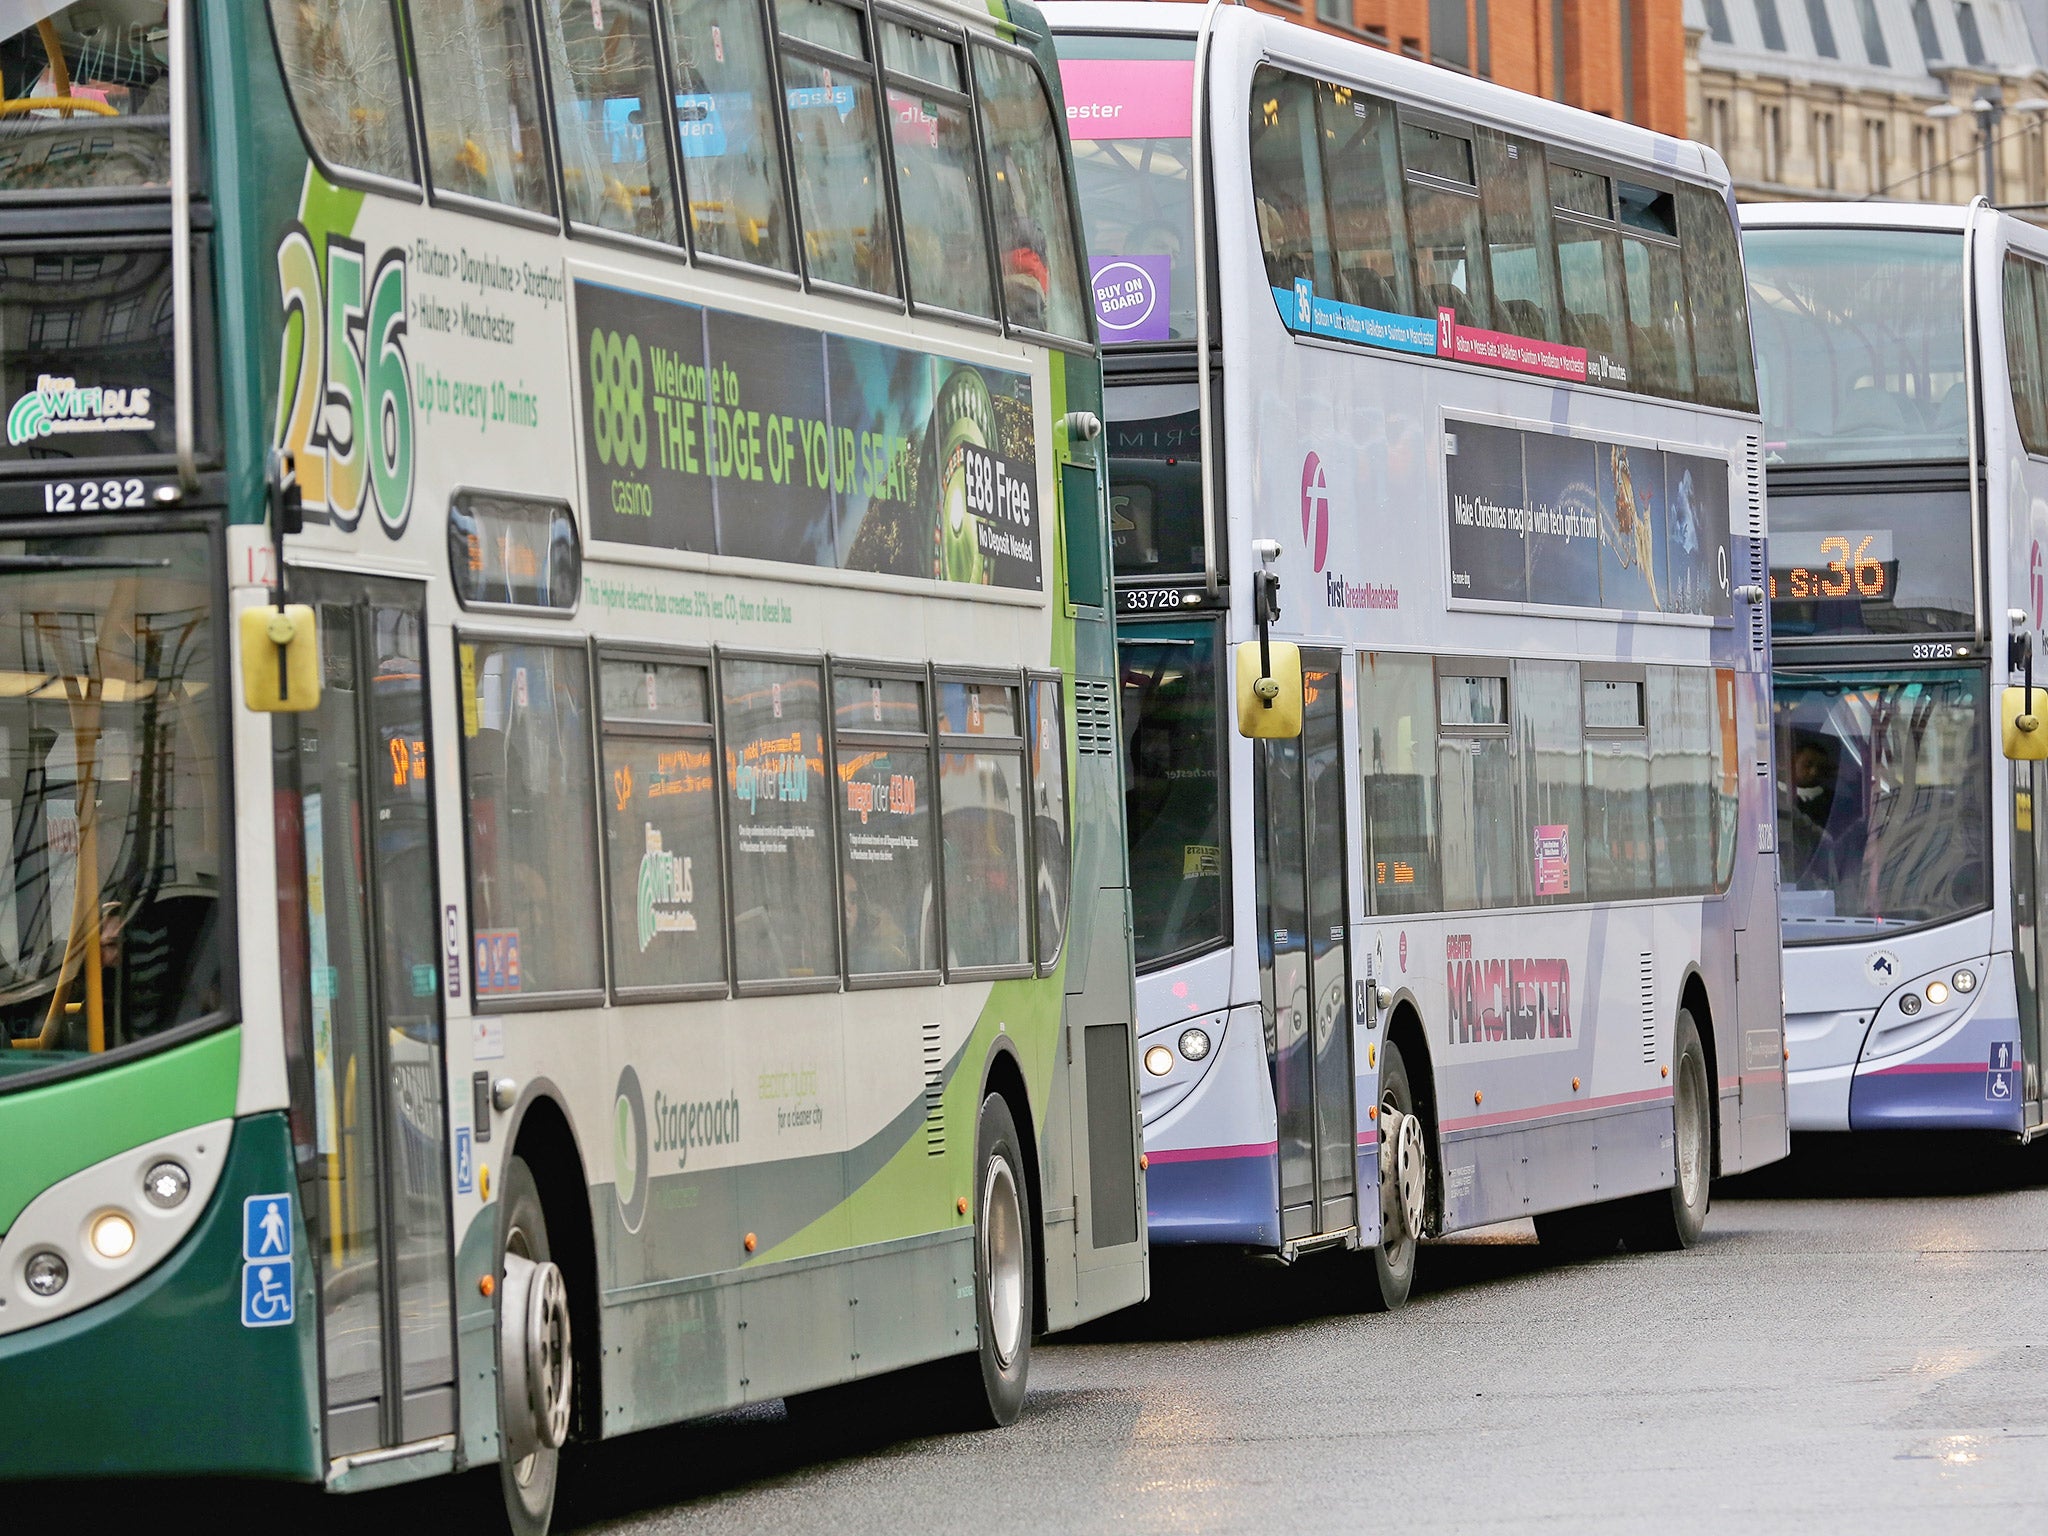 Buses queue up for passengers on the streets of Manchester